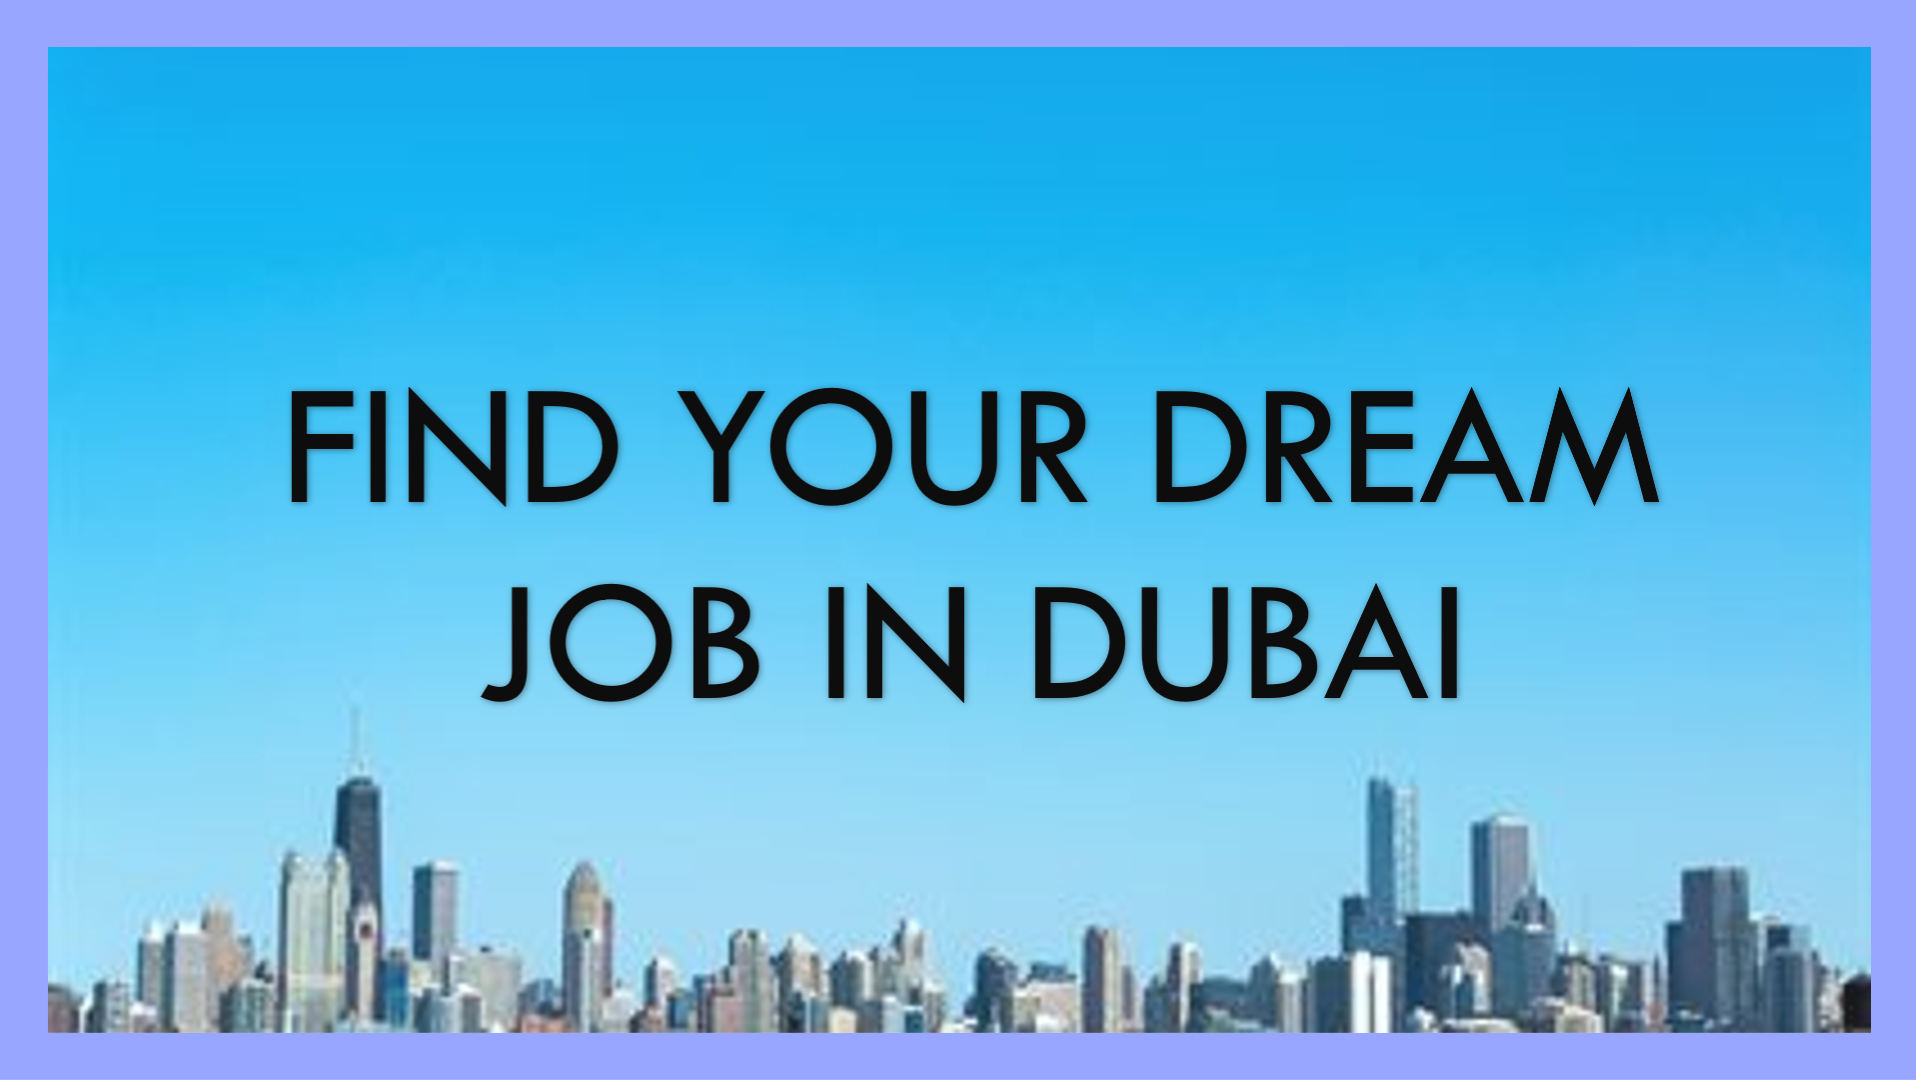 job openings in dubai with salary 20,000 to 30,000 AED